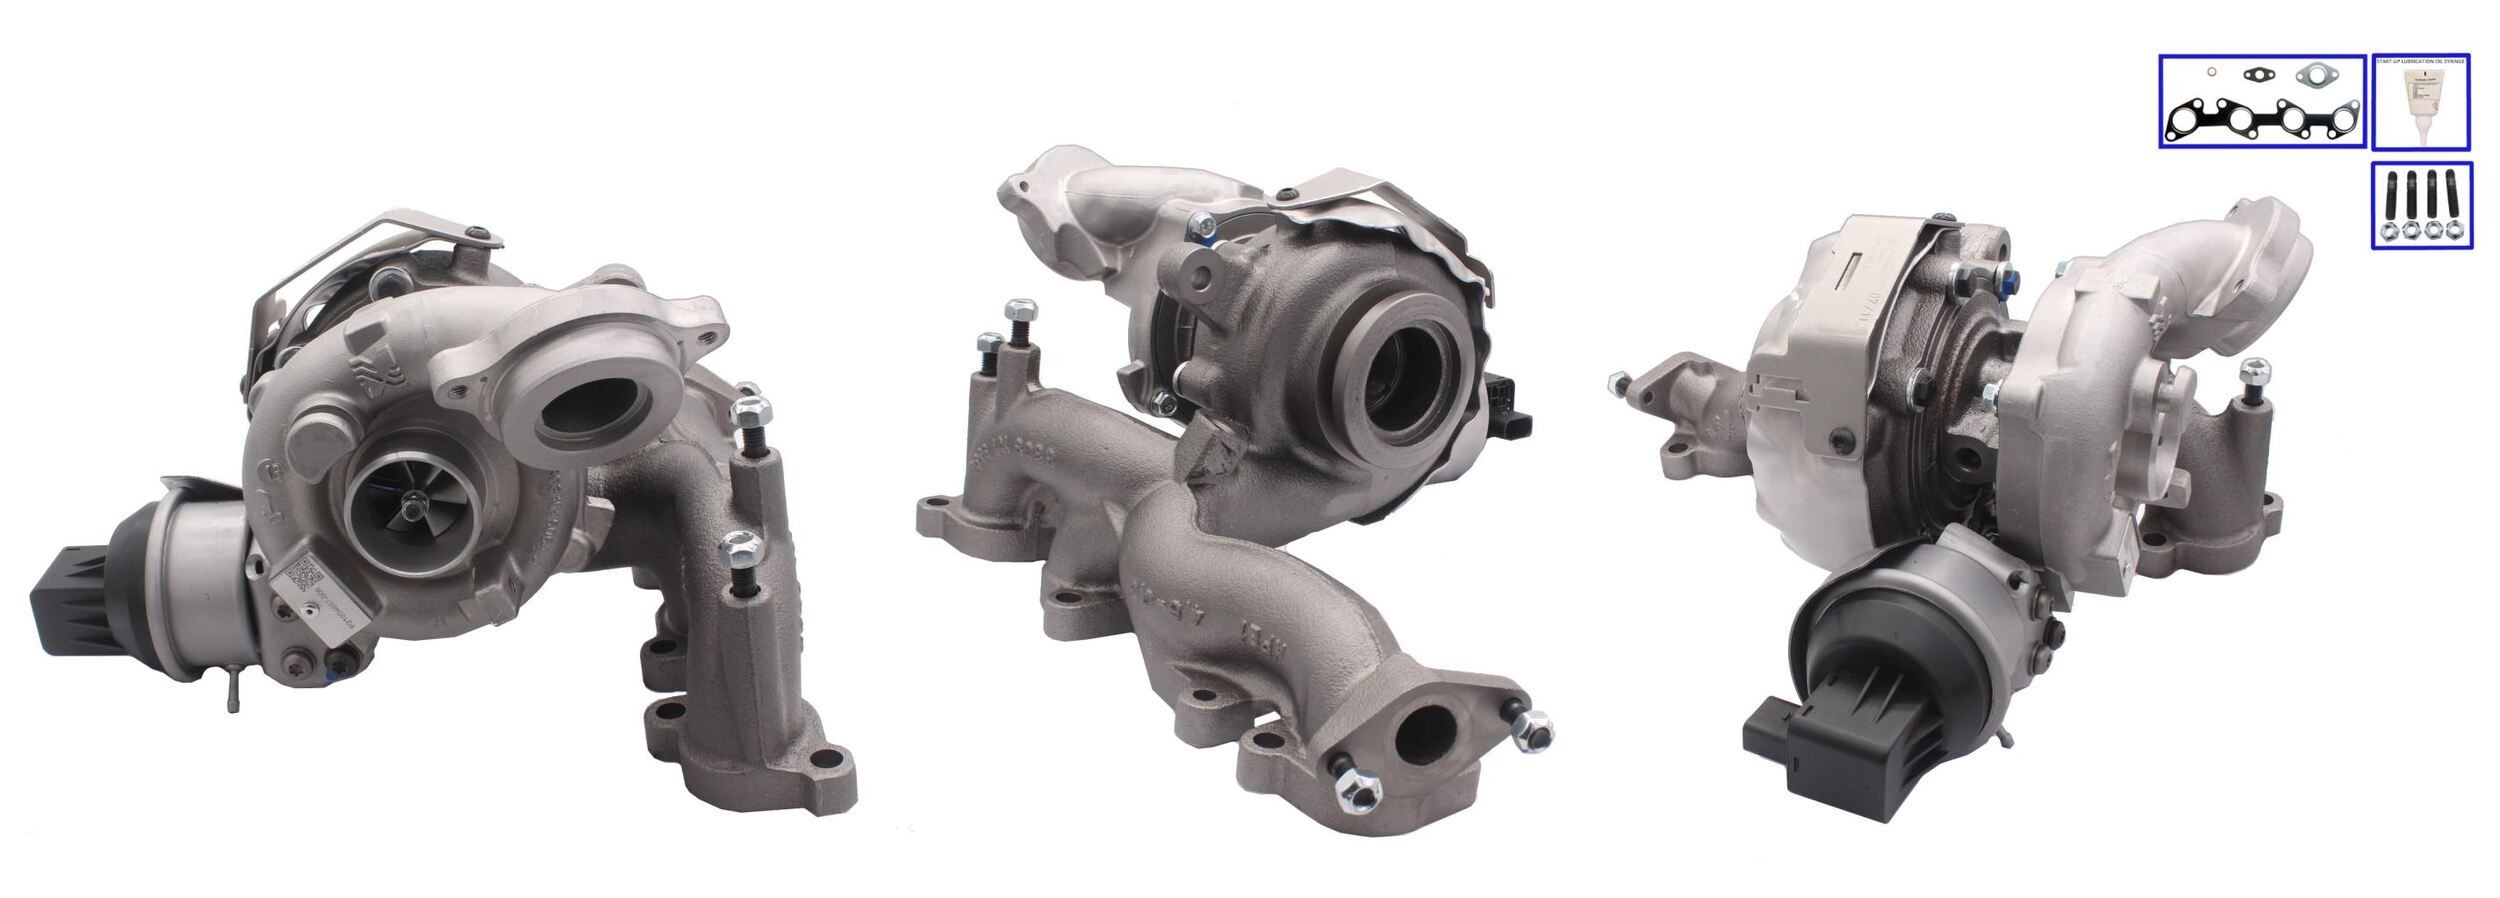 Volkswagen Turbocharger LUCAS LTRPA53039880139 at a good price